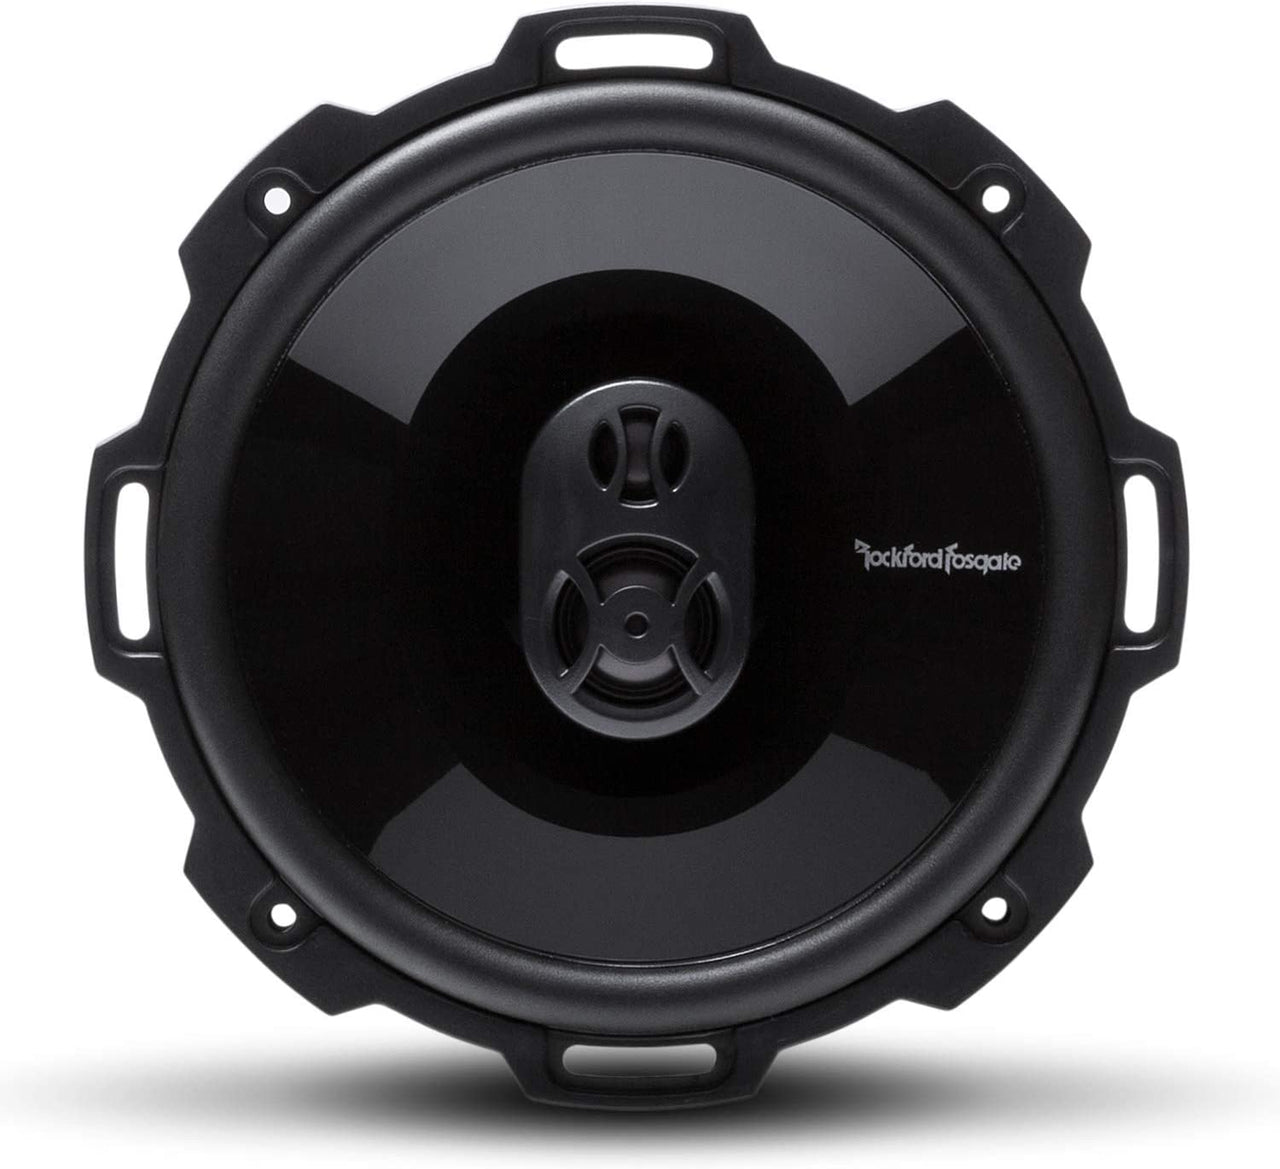 Rockford Punch P1675 220W 6 3/4" 3-Way Punch Series Full-Range Coaxial Car Speakers